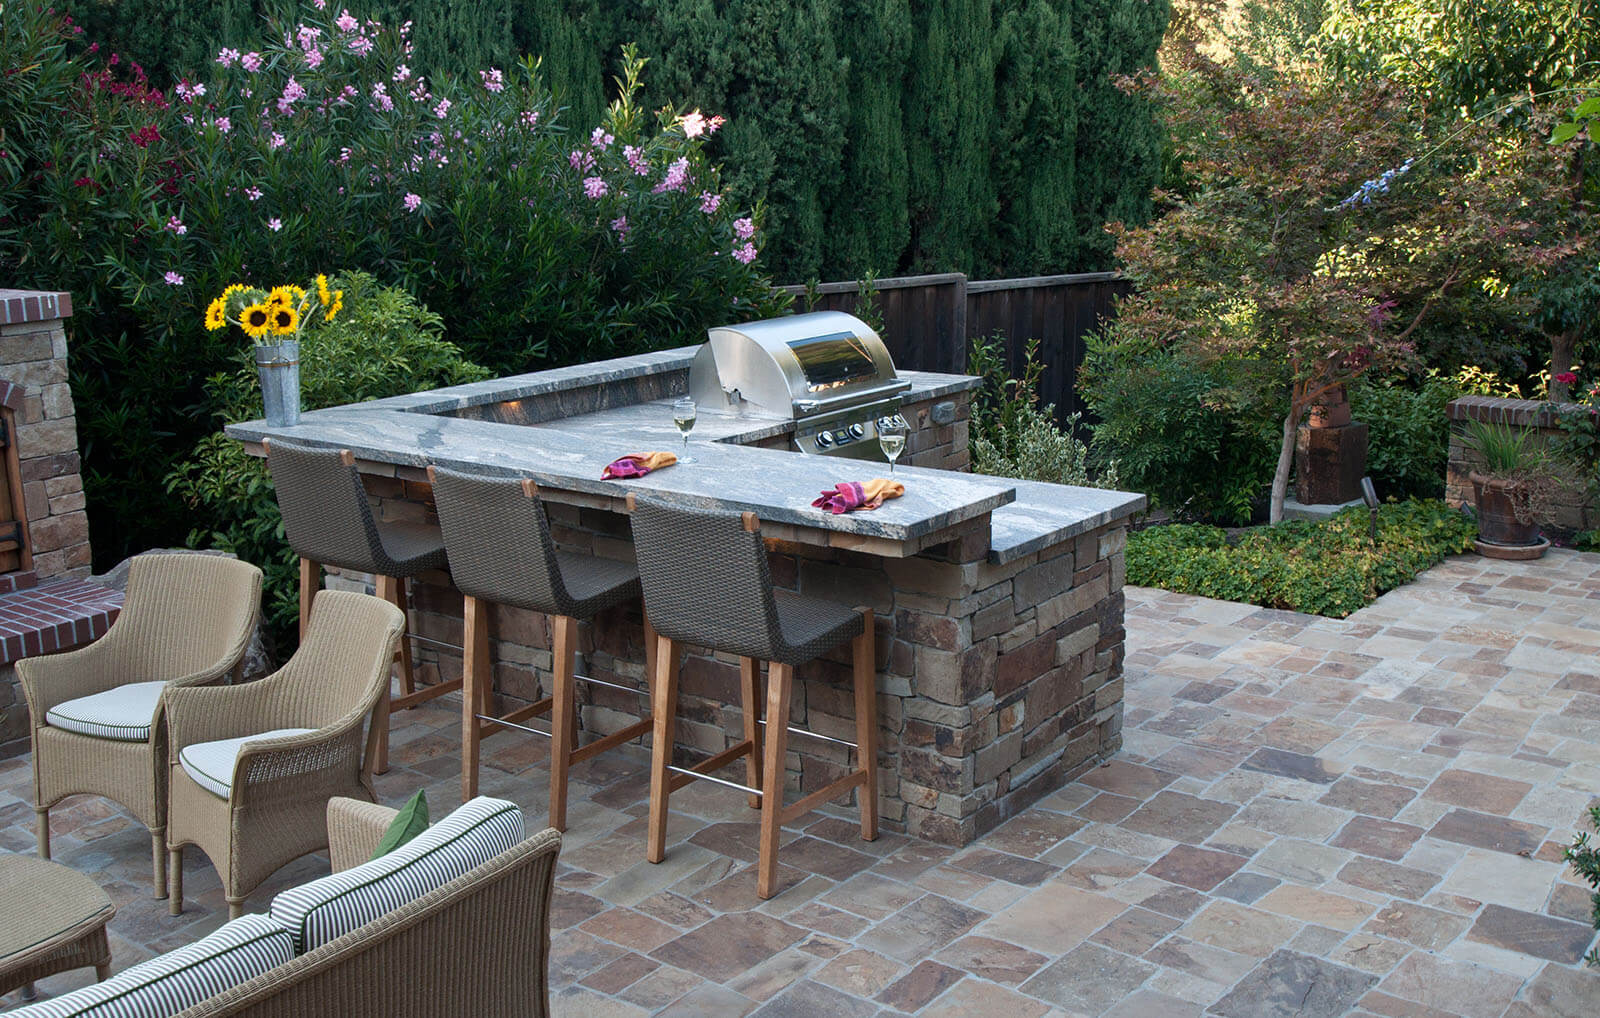 Staged stone counter top and prep area with custom grill, on a stone tile patio